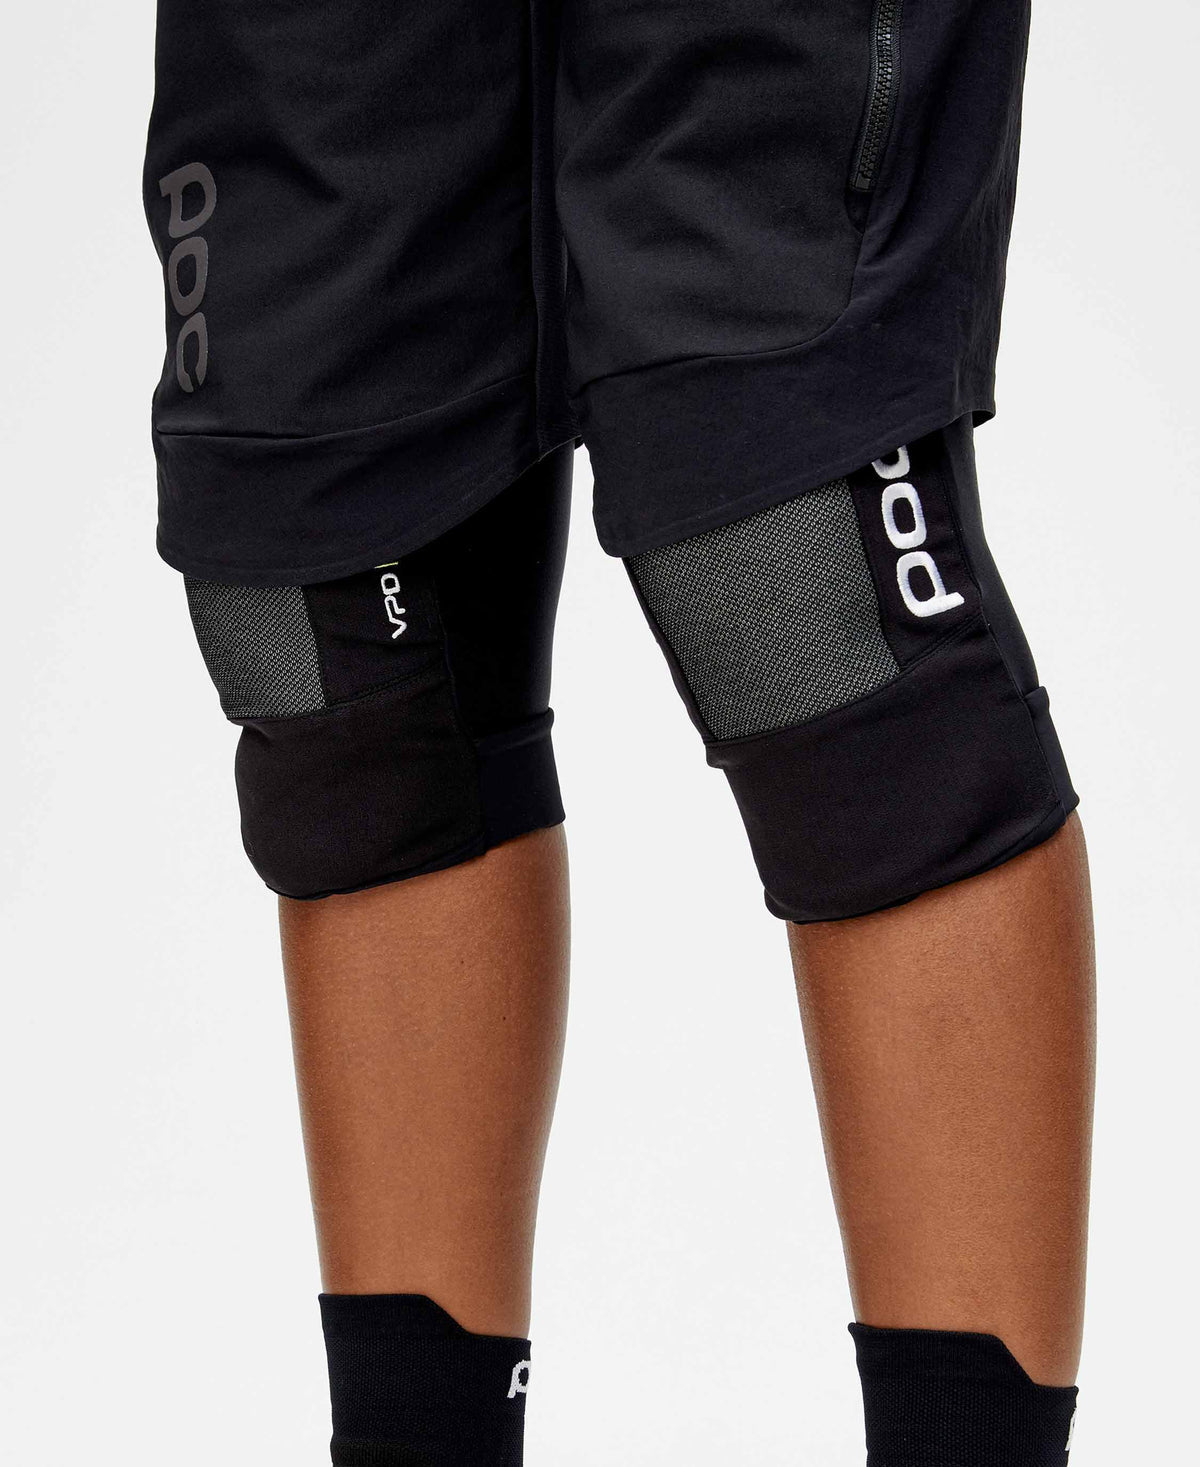 POC JOINT VPD SYSTEM KNEE PROTECTION